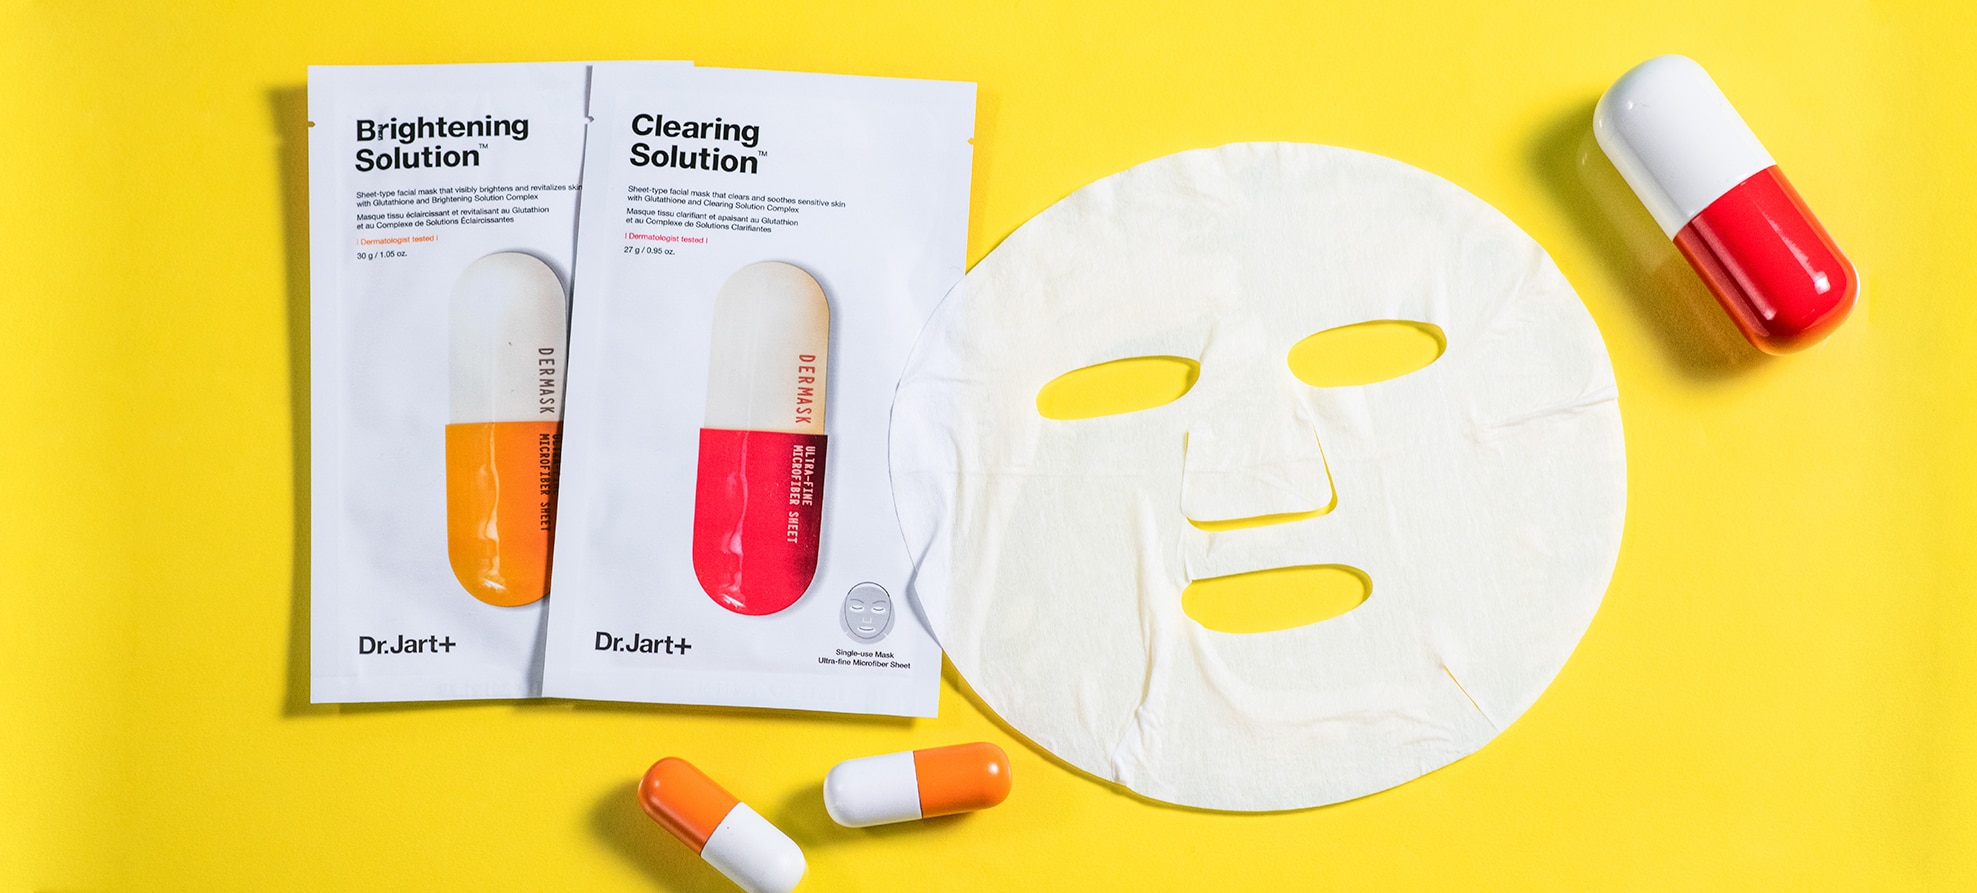 Dermask brightening and clearing masks laid on a bright background with decorative pill capsules